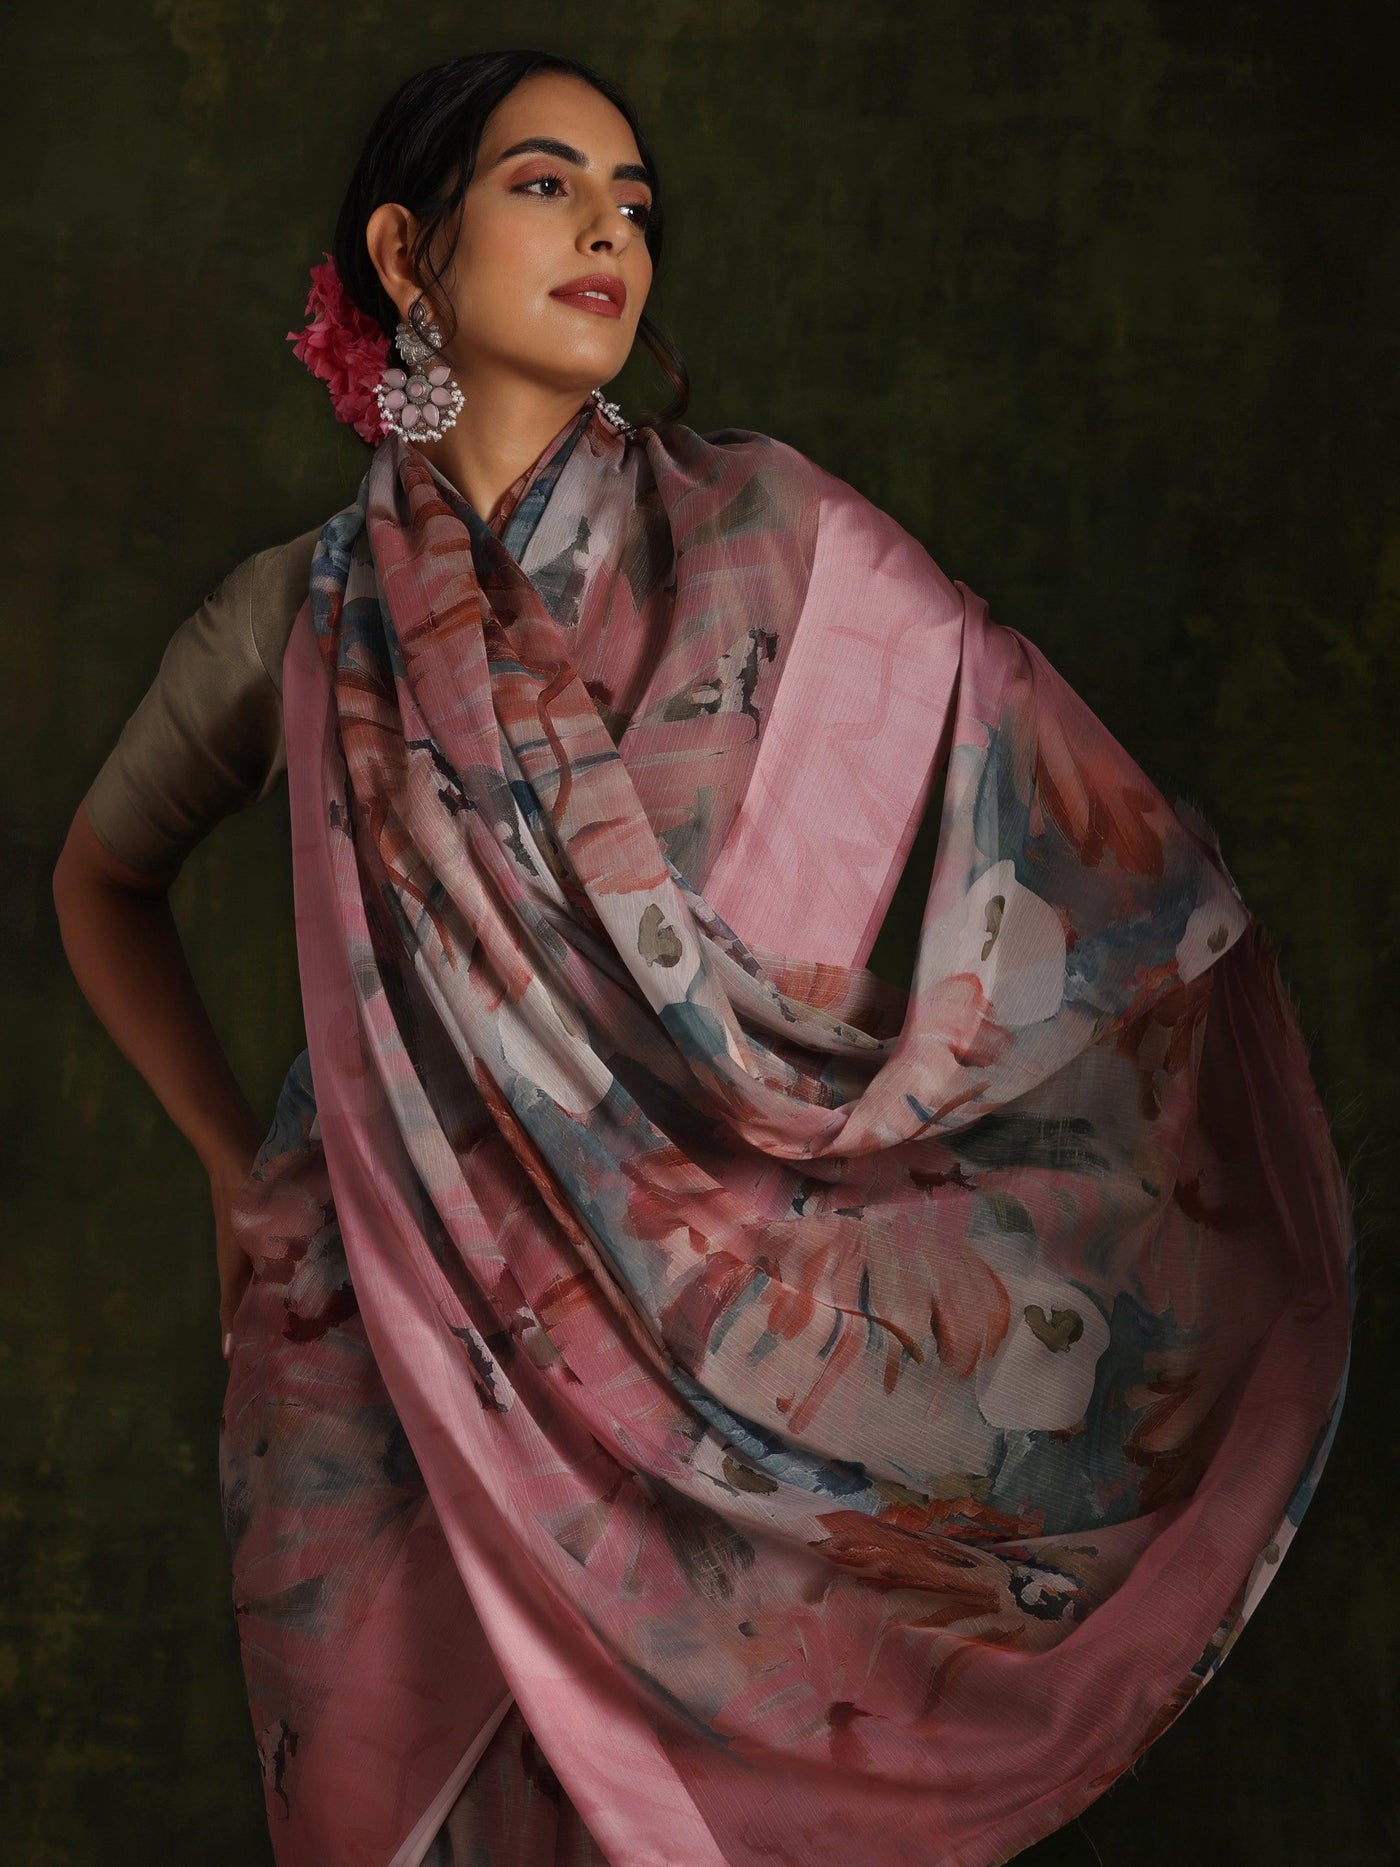 Pink Printed Silk Blend Saree With Unstitched Blouse Piece - ShopLibas